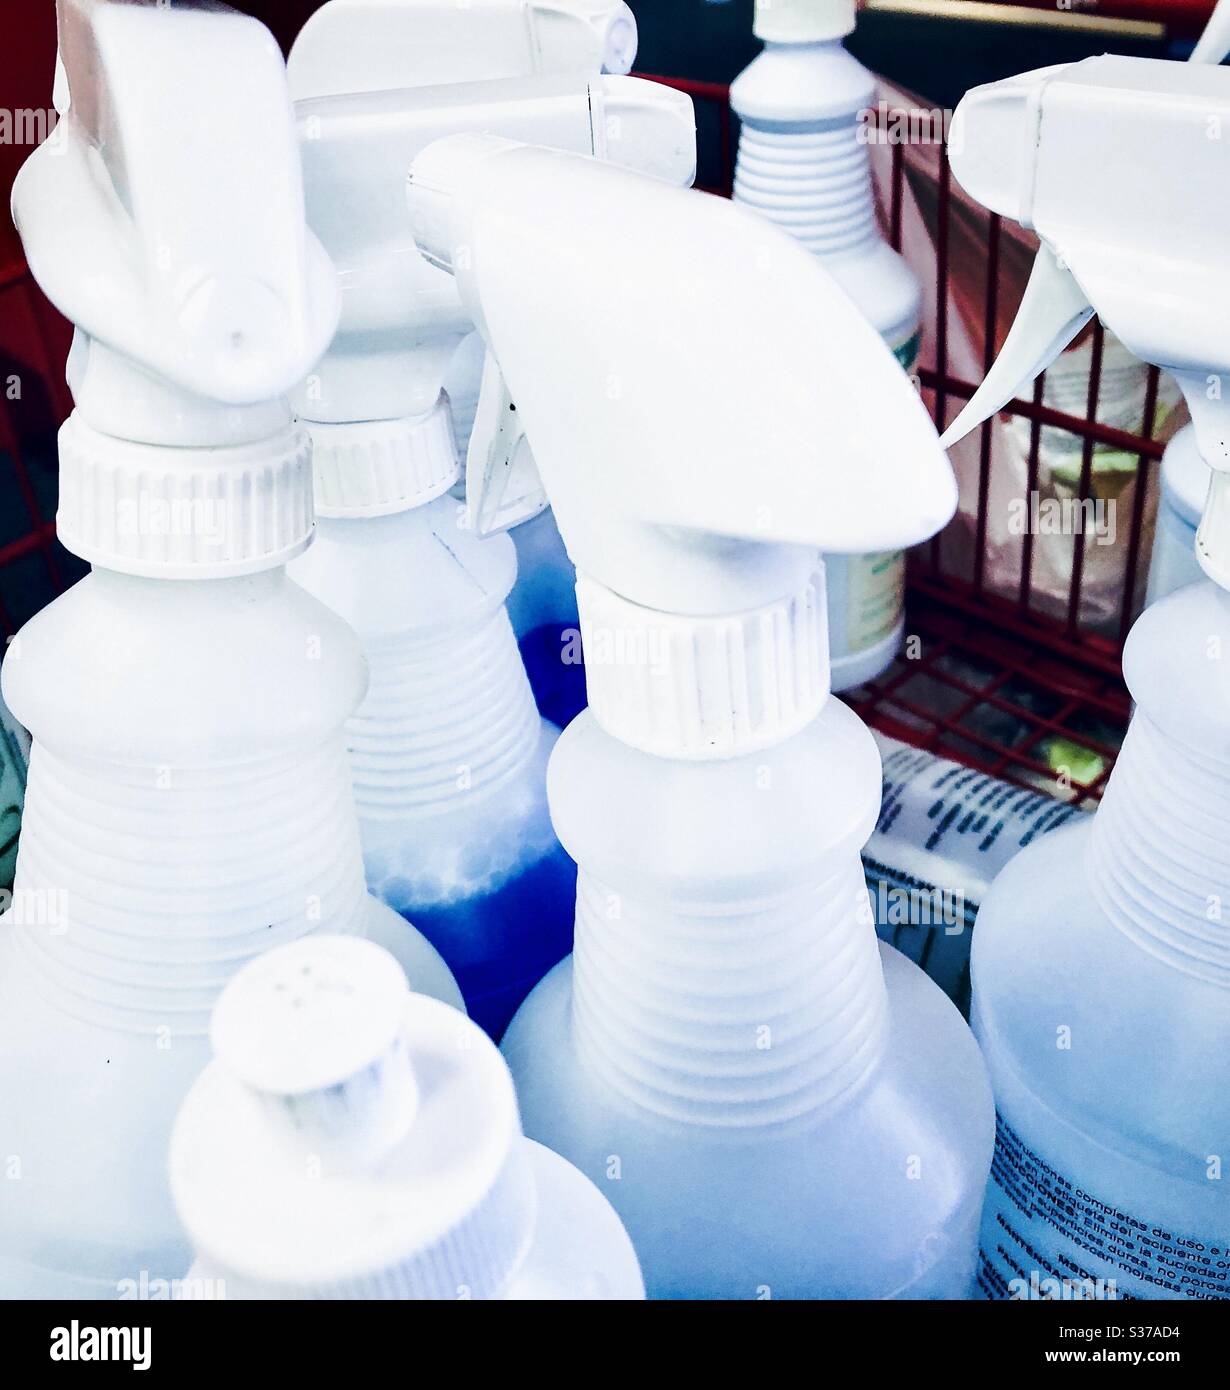 Spray bottles disinfectant for cleaning shopping carts retail store Stock Photo